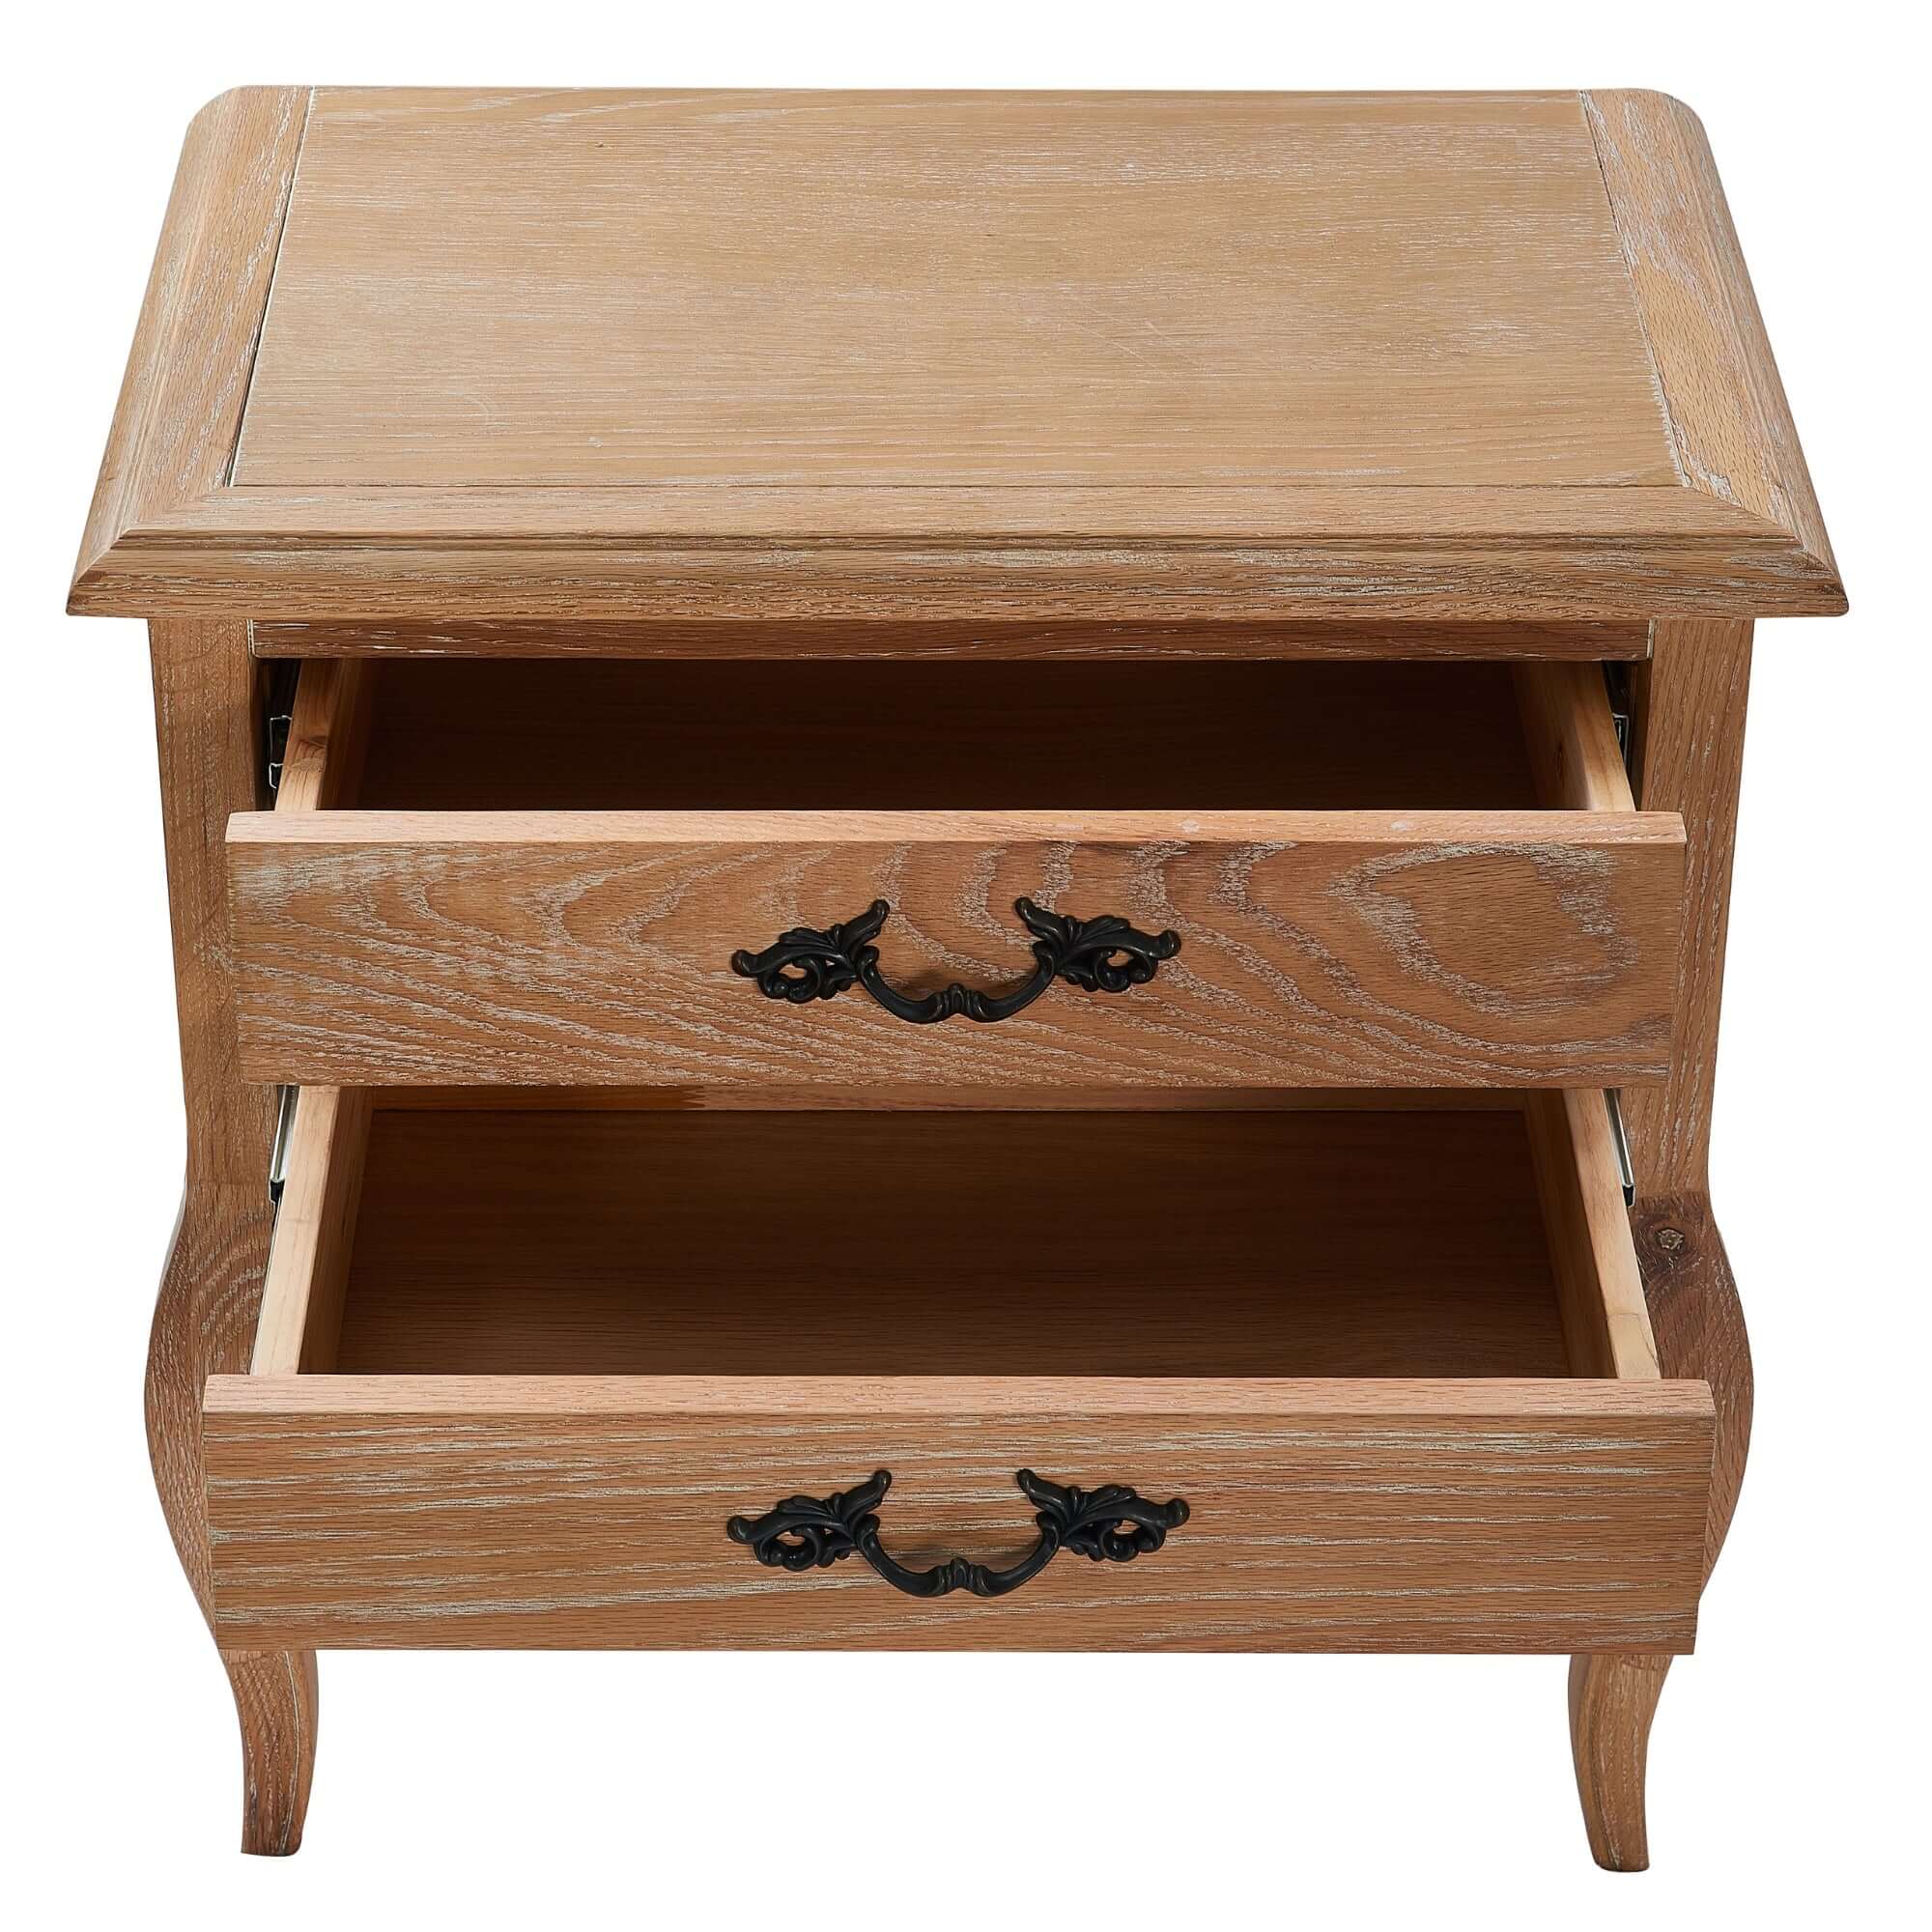 Bali Bedside Table - French Provincial Oak Style-Upinteriors